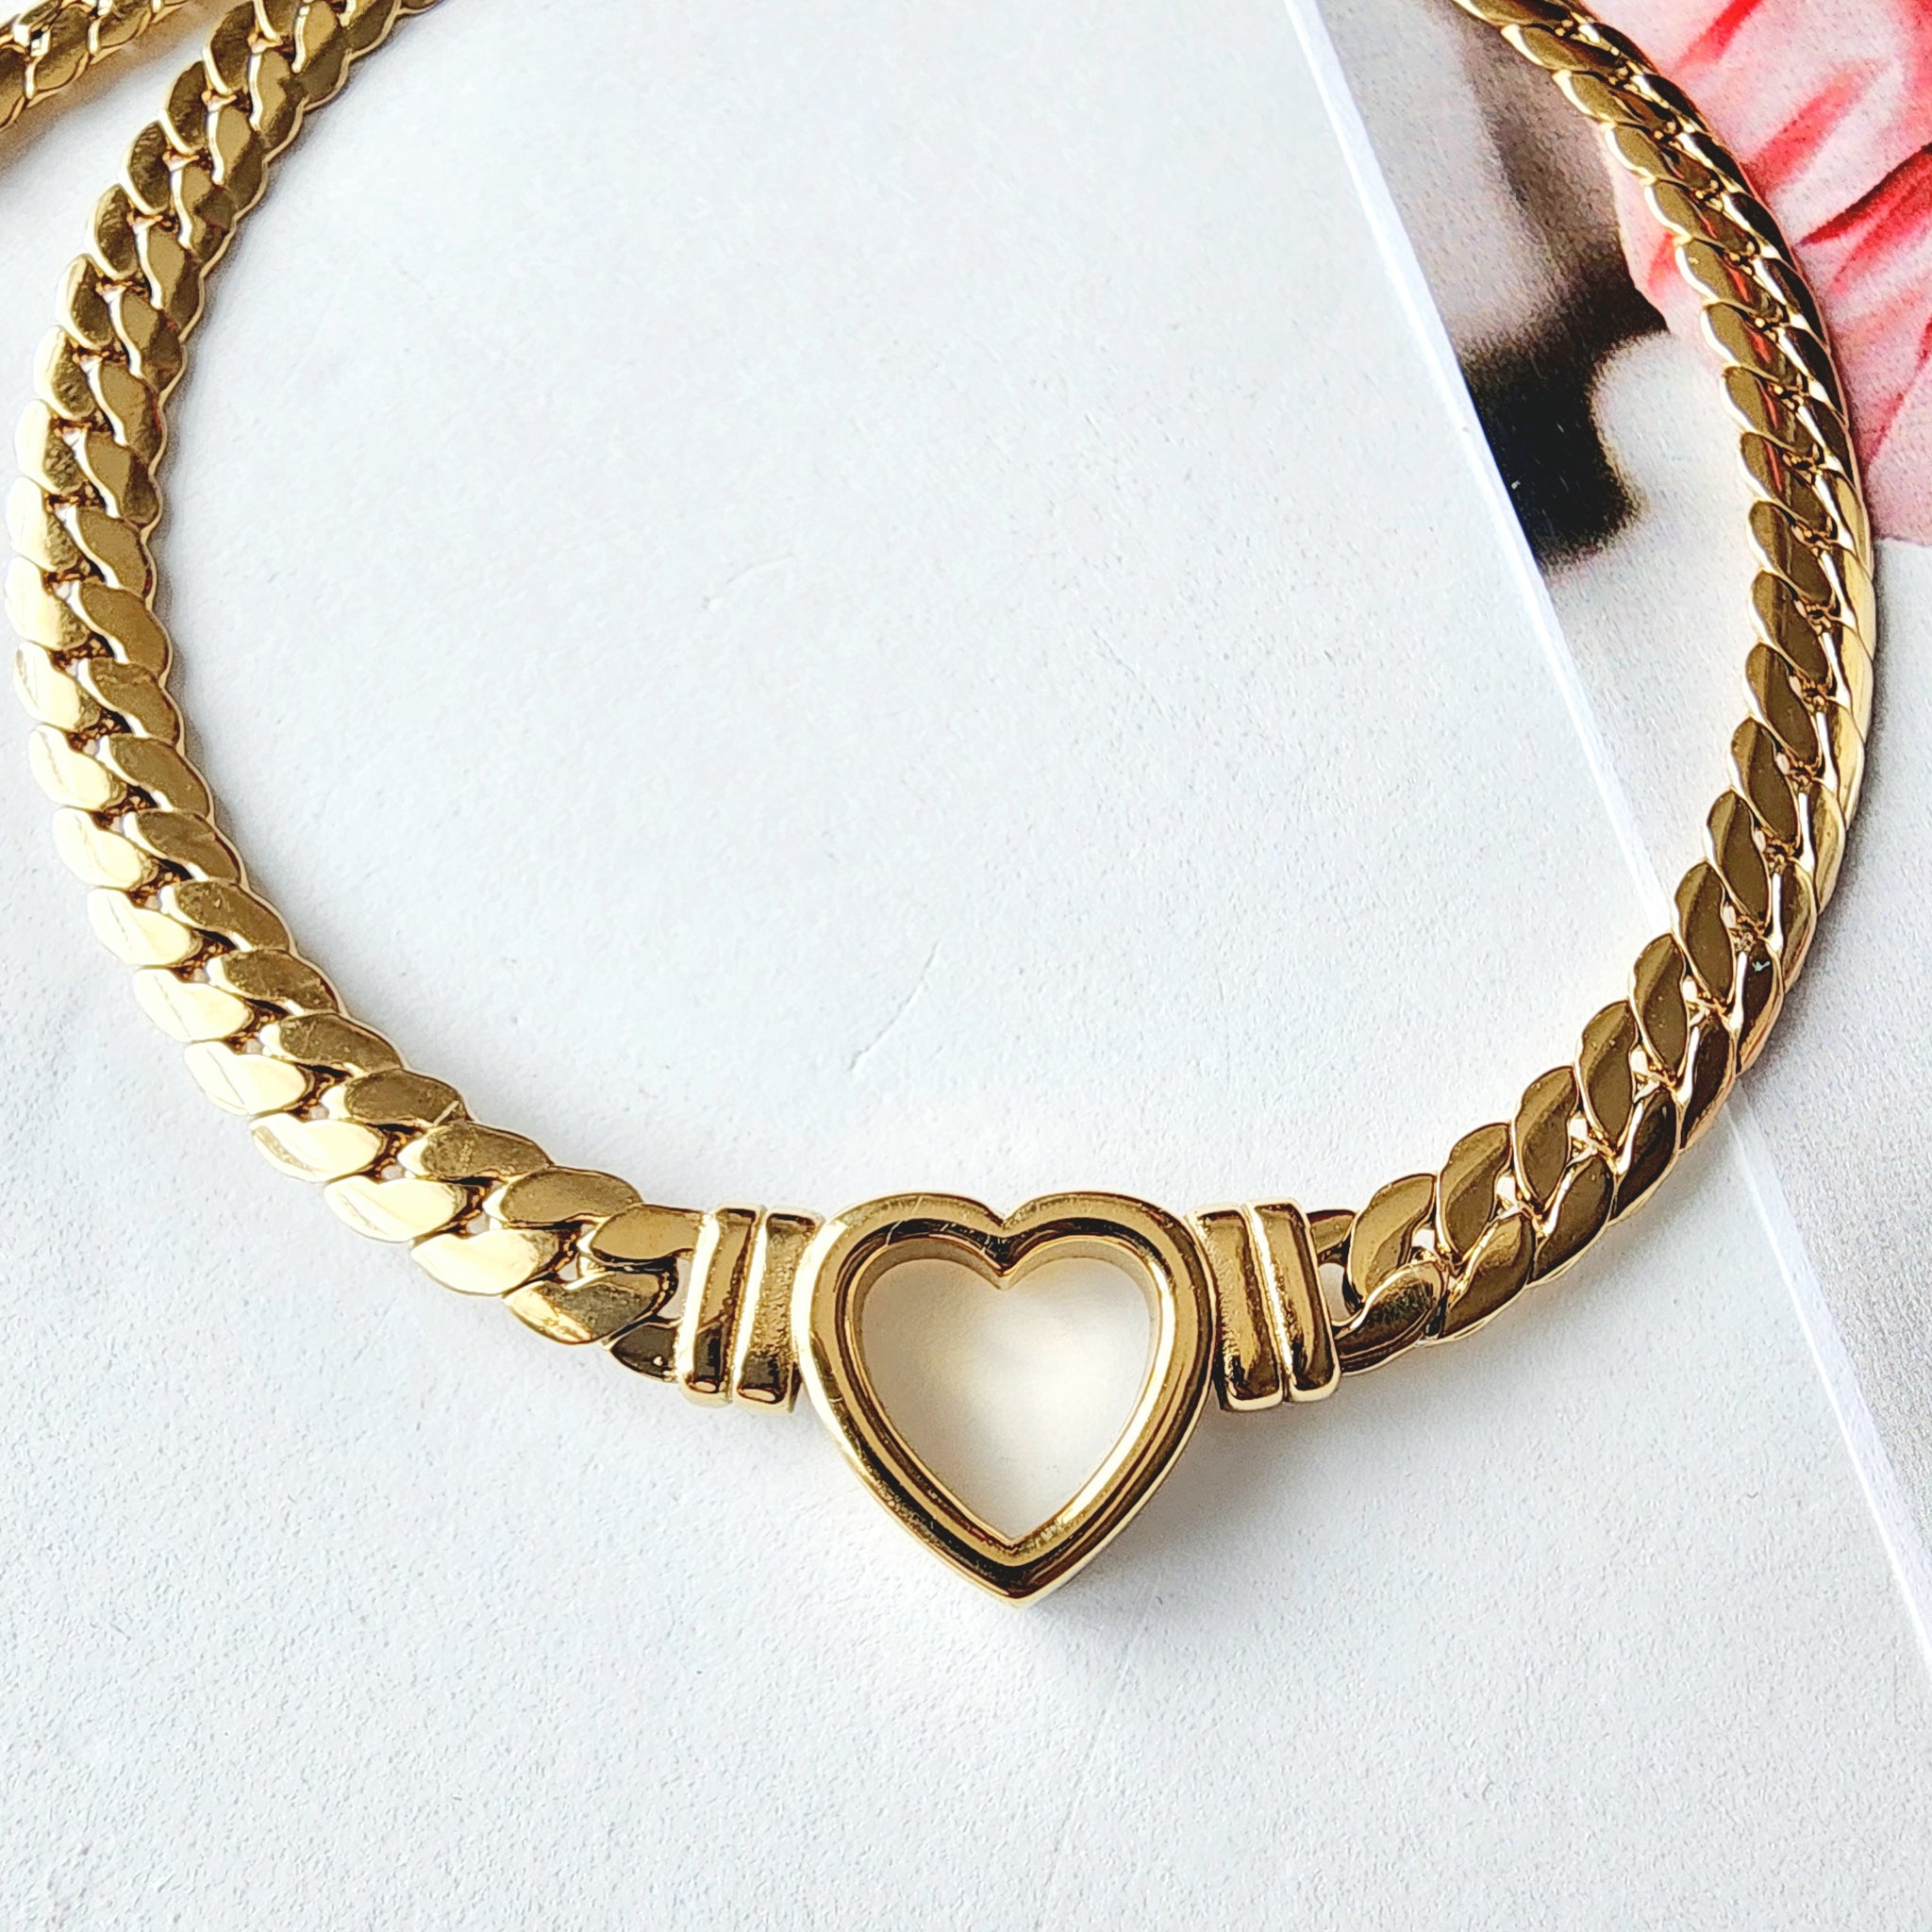 The Sweetheart Necklace